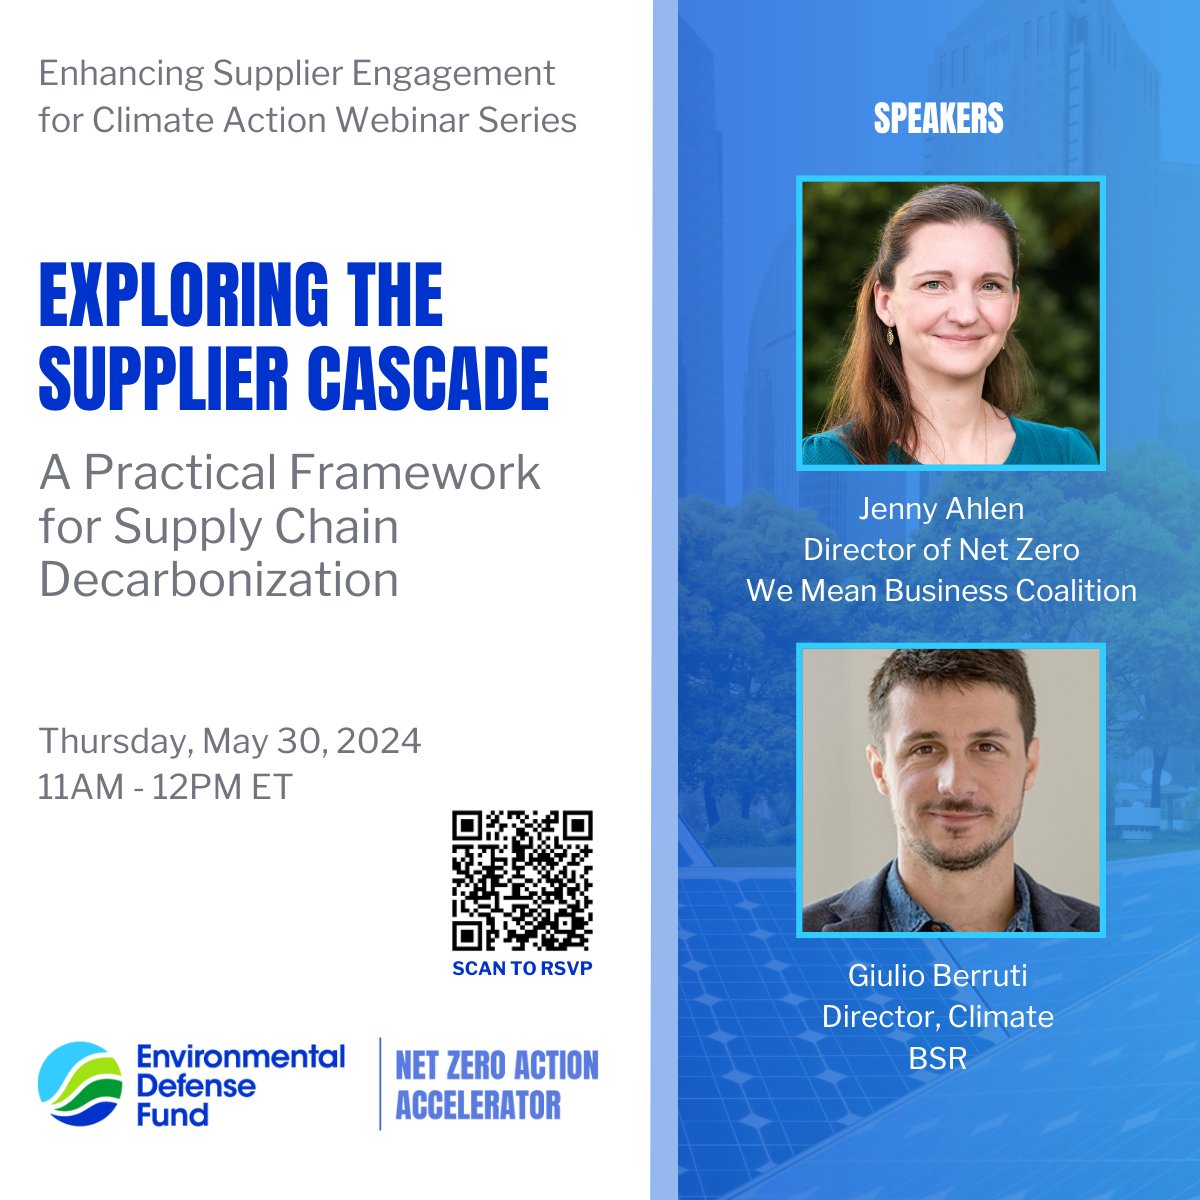 Alert: Insightful webinar on the Supplier Cascade coming up! 🚨 #Scope3 emissions are complex, but working w/ your supply chain is critical for transforming our economy & ensuring a resilient world. 🌎 📅 5/30 ⏰ 11 AM ET 📌 RSVP: netzeroaction.org/trainings/expl…